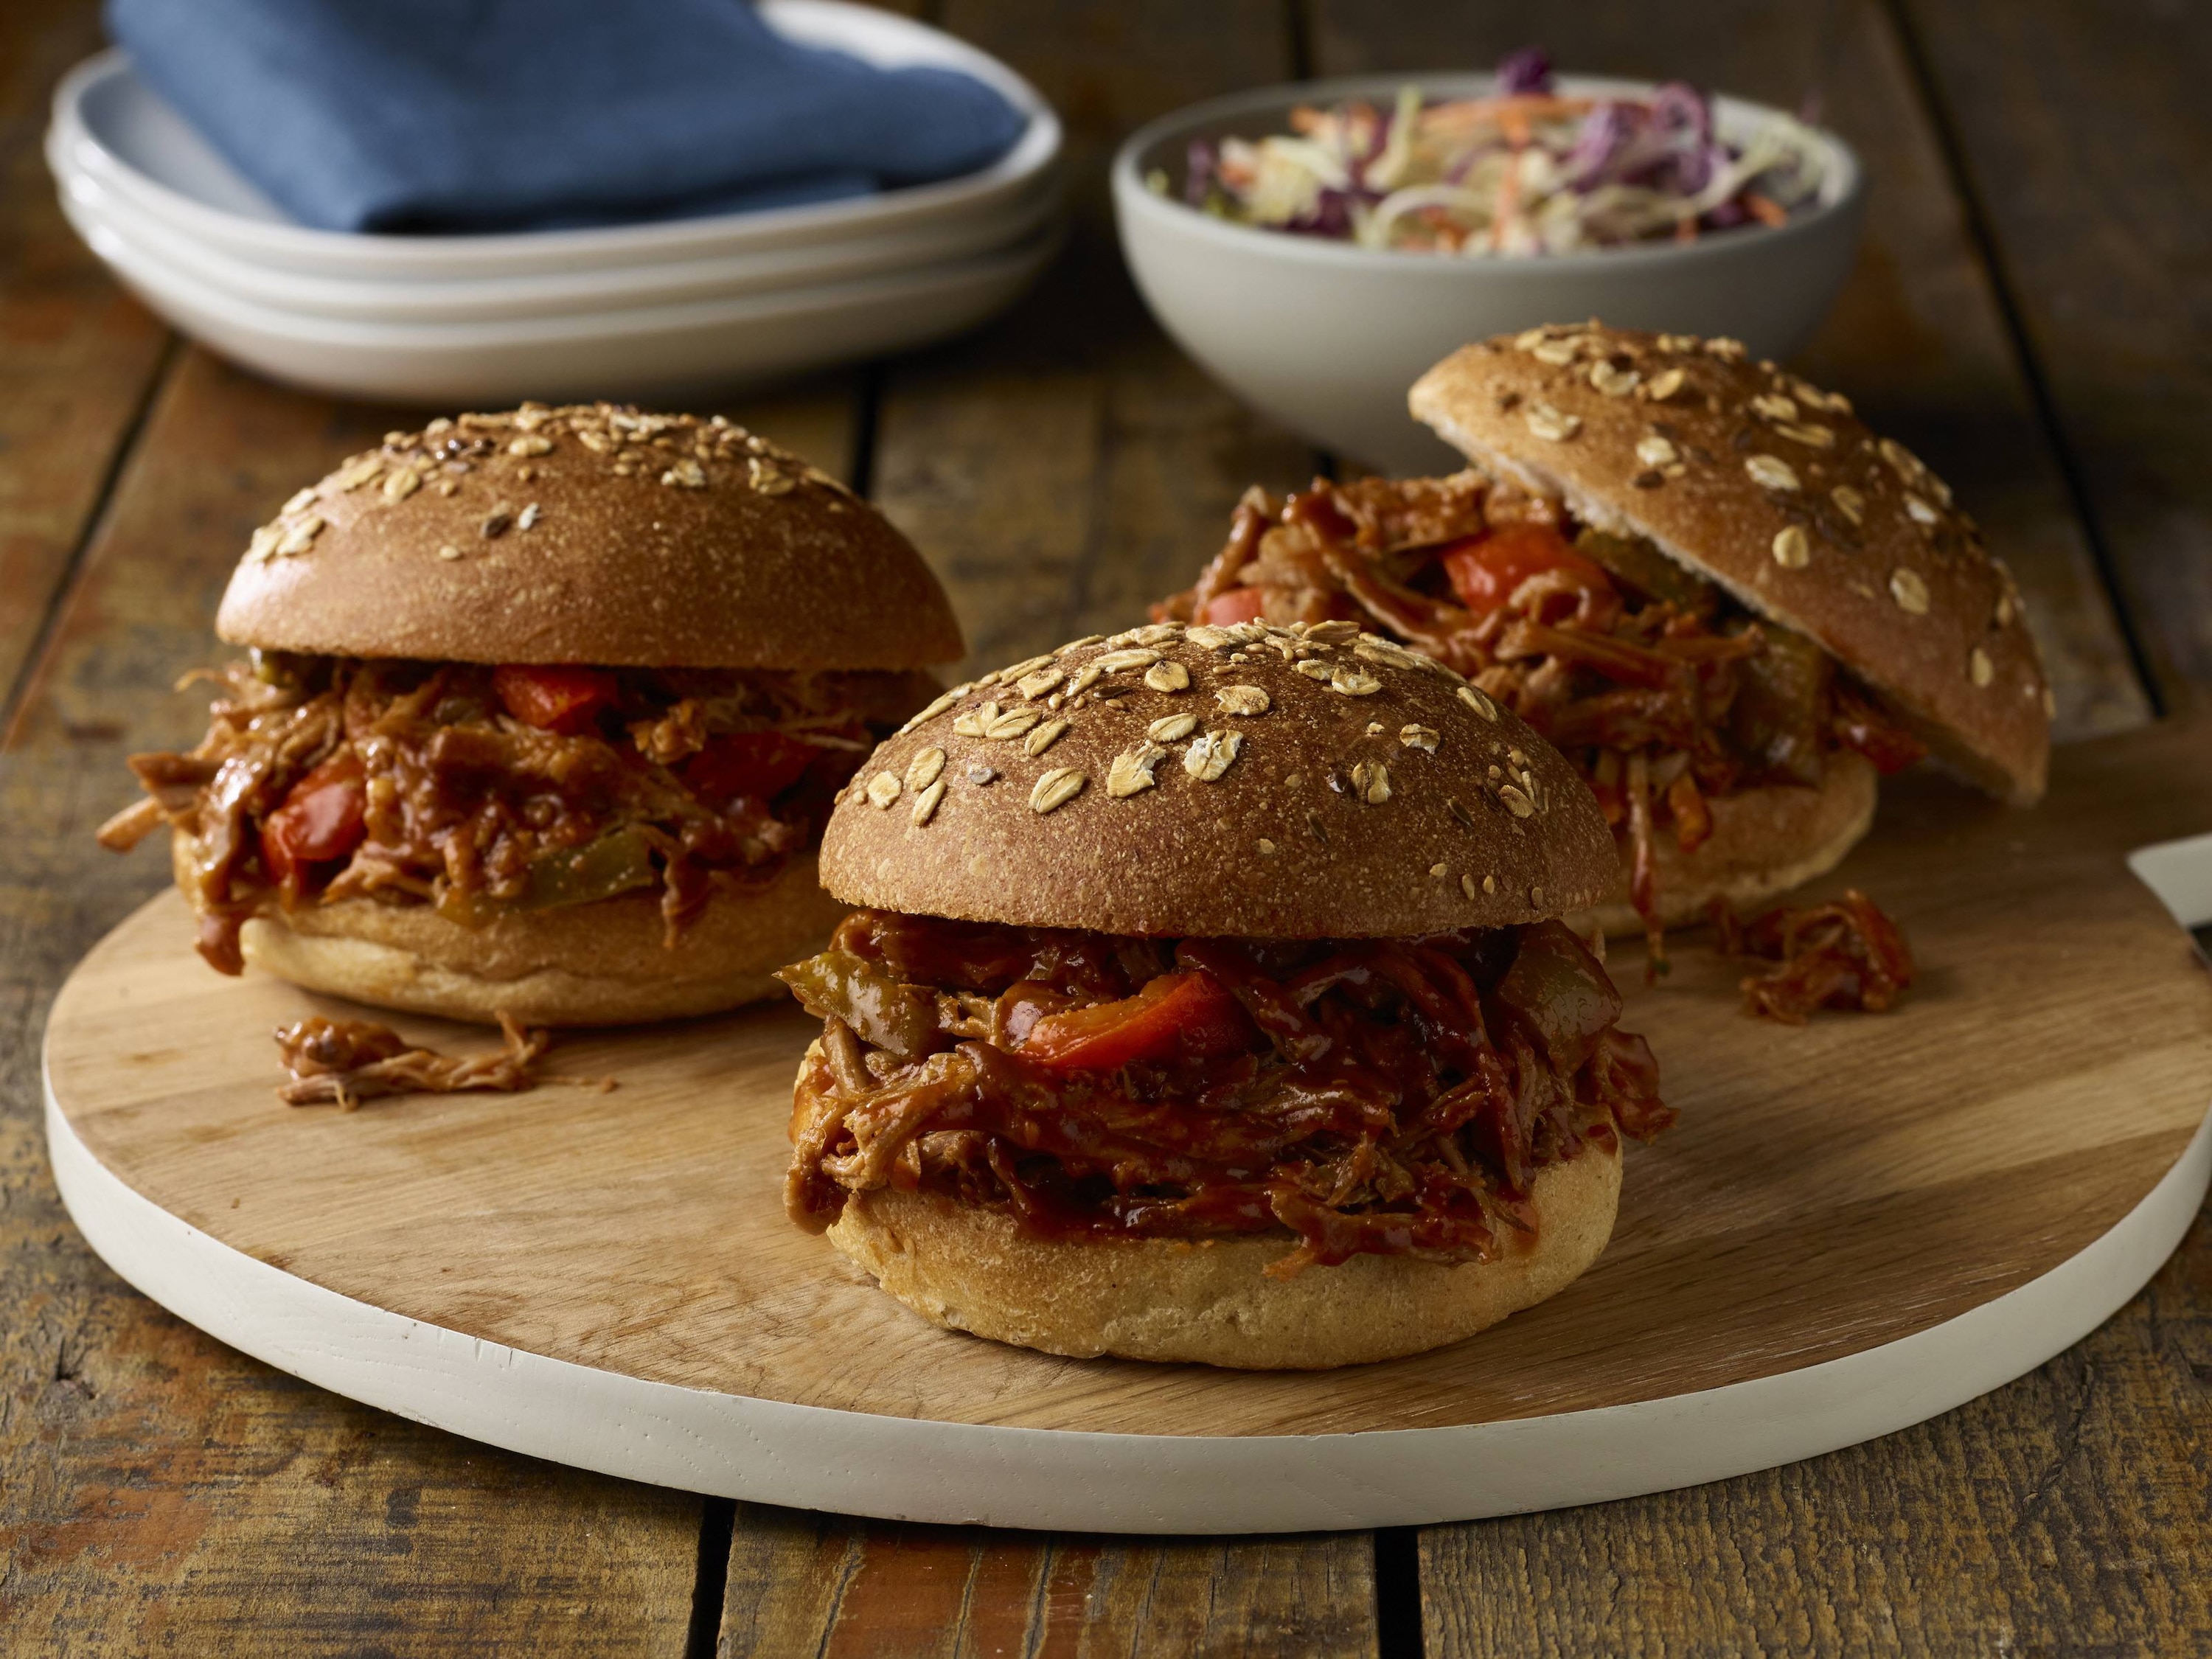 Slow cooked pulled pork sandwich